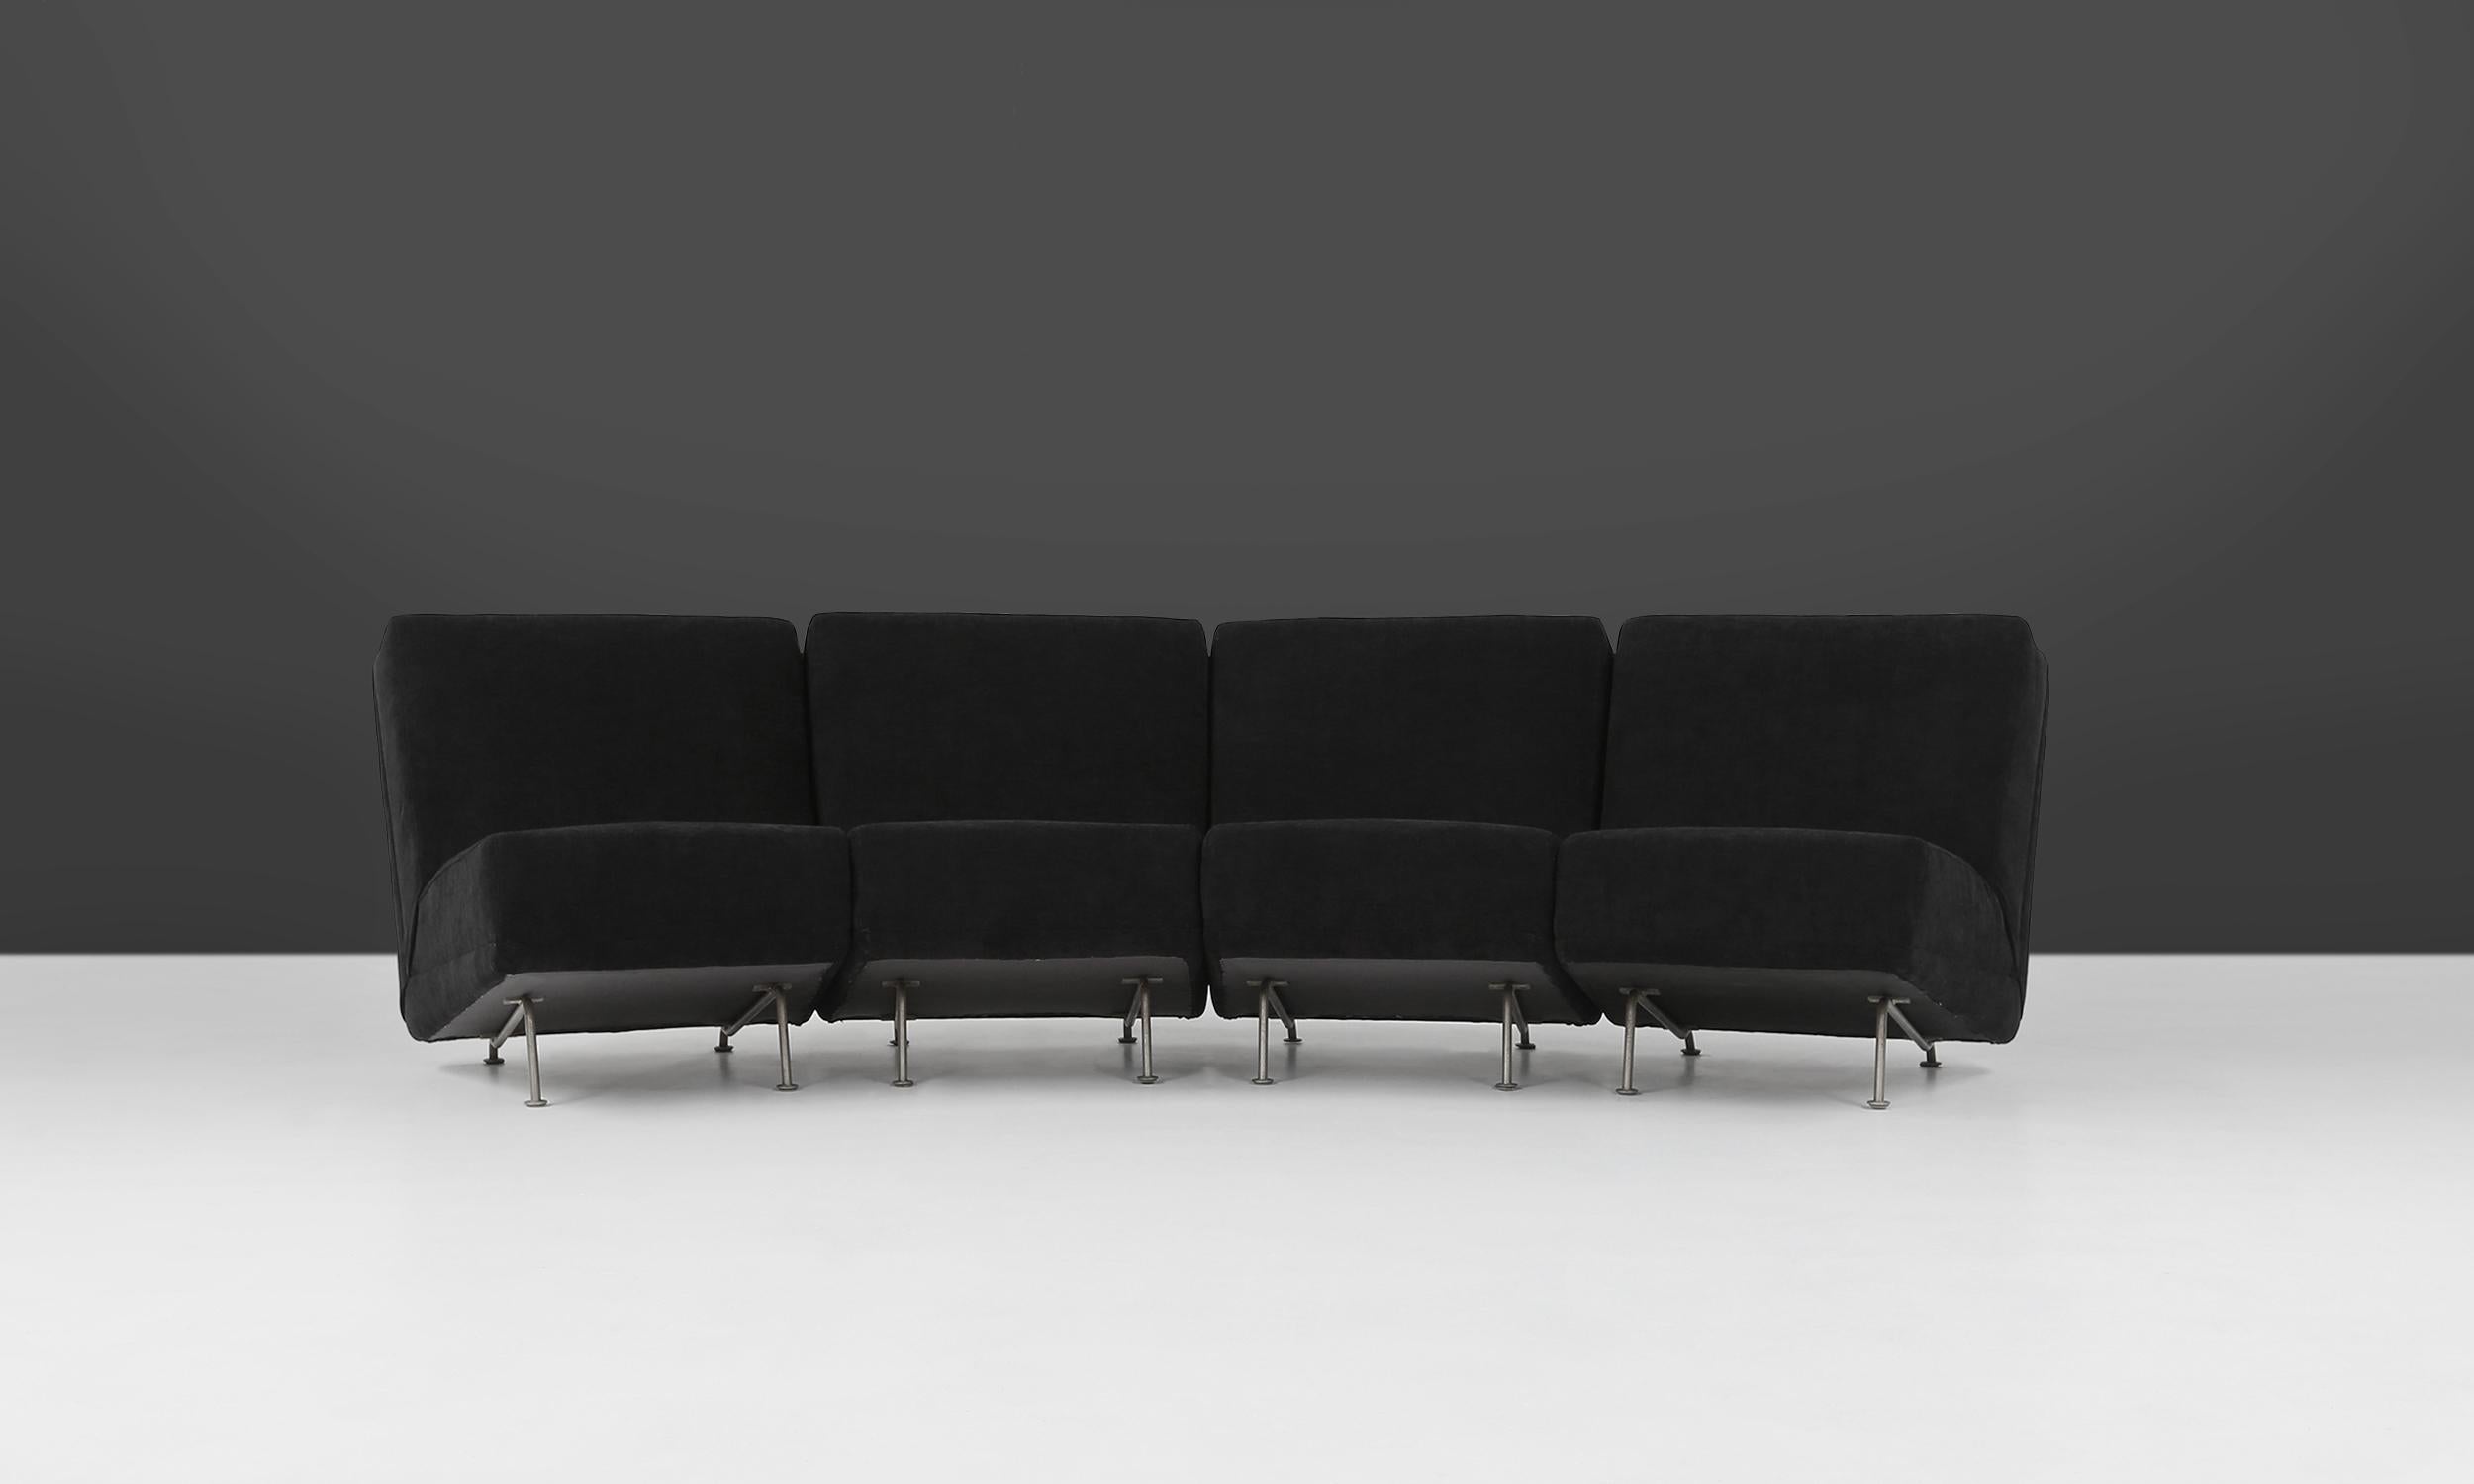 Modular seating group by Dutch designer Theo Ruth for Artifort in the 1950's. The four elements can be used separately or can be combined together as a four-seat sofa. These chairs have a metal base and a wooden structure with a fully reupholsterd